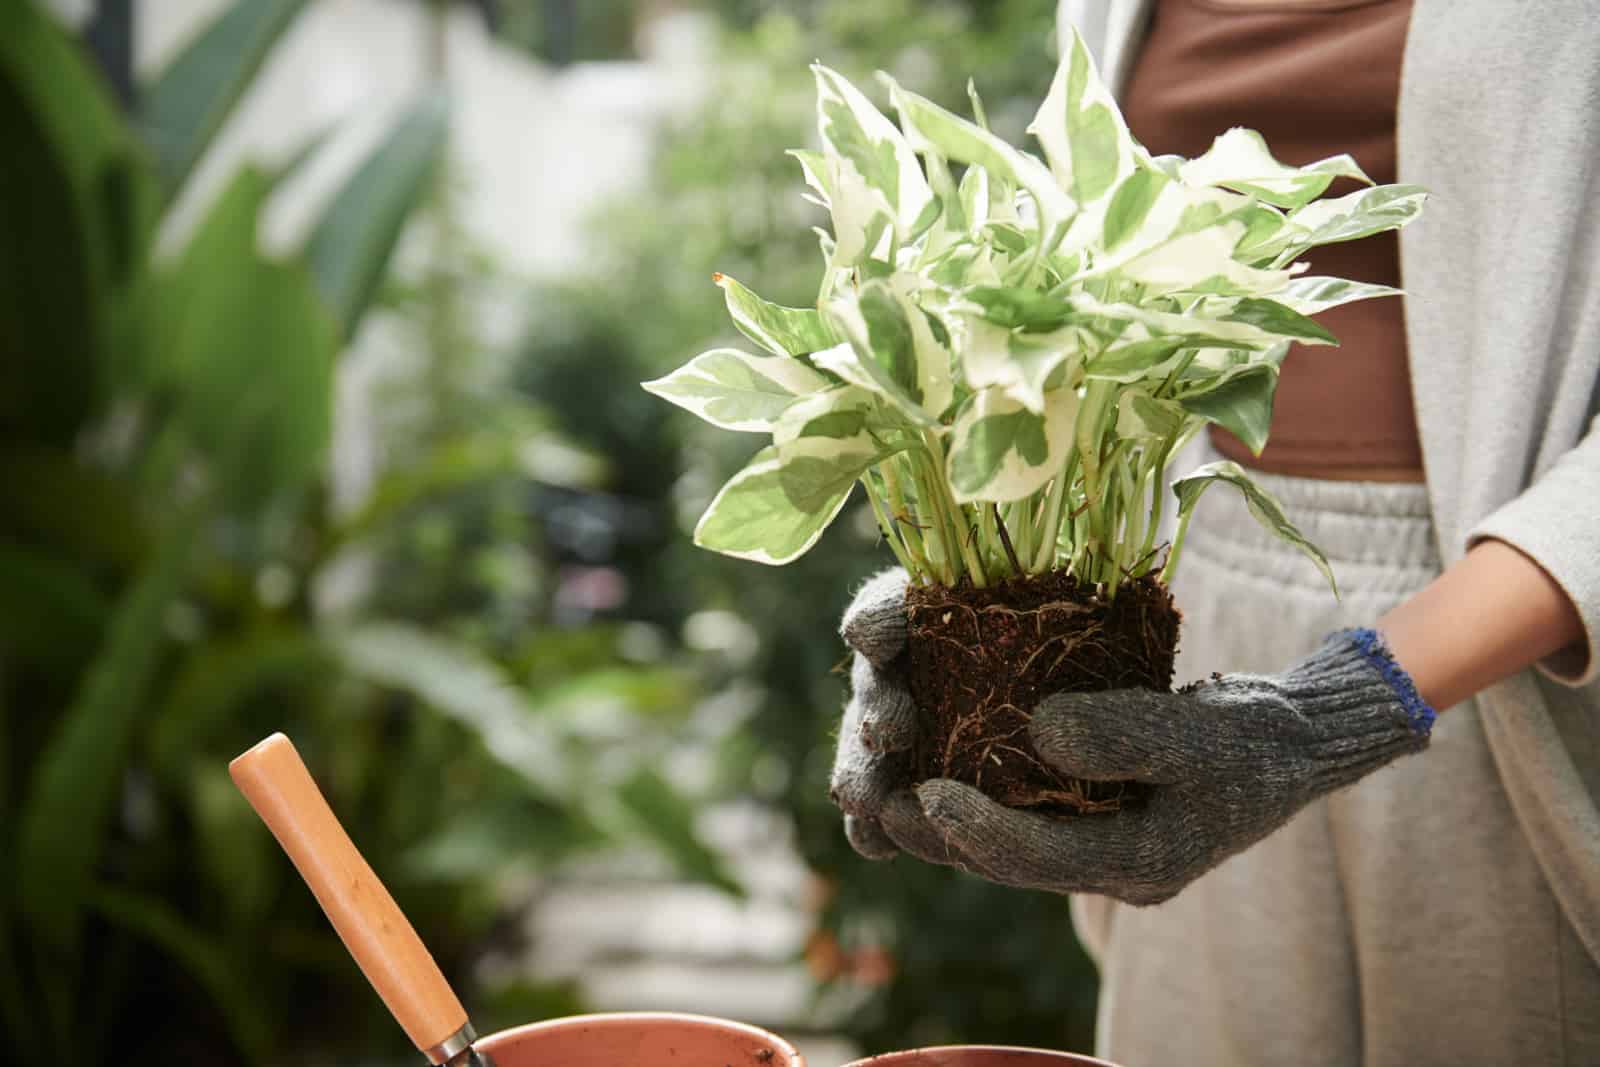 Cropped image of female gardener in textile gloves holding potos plant